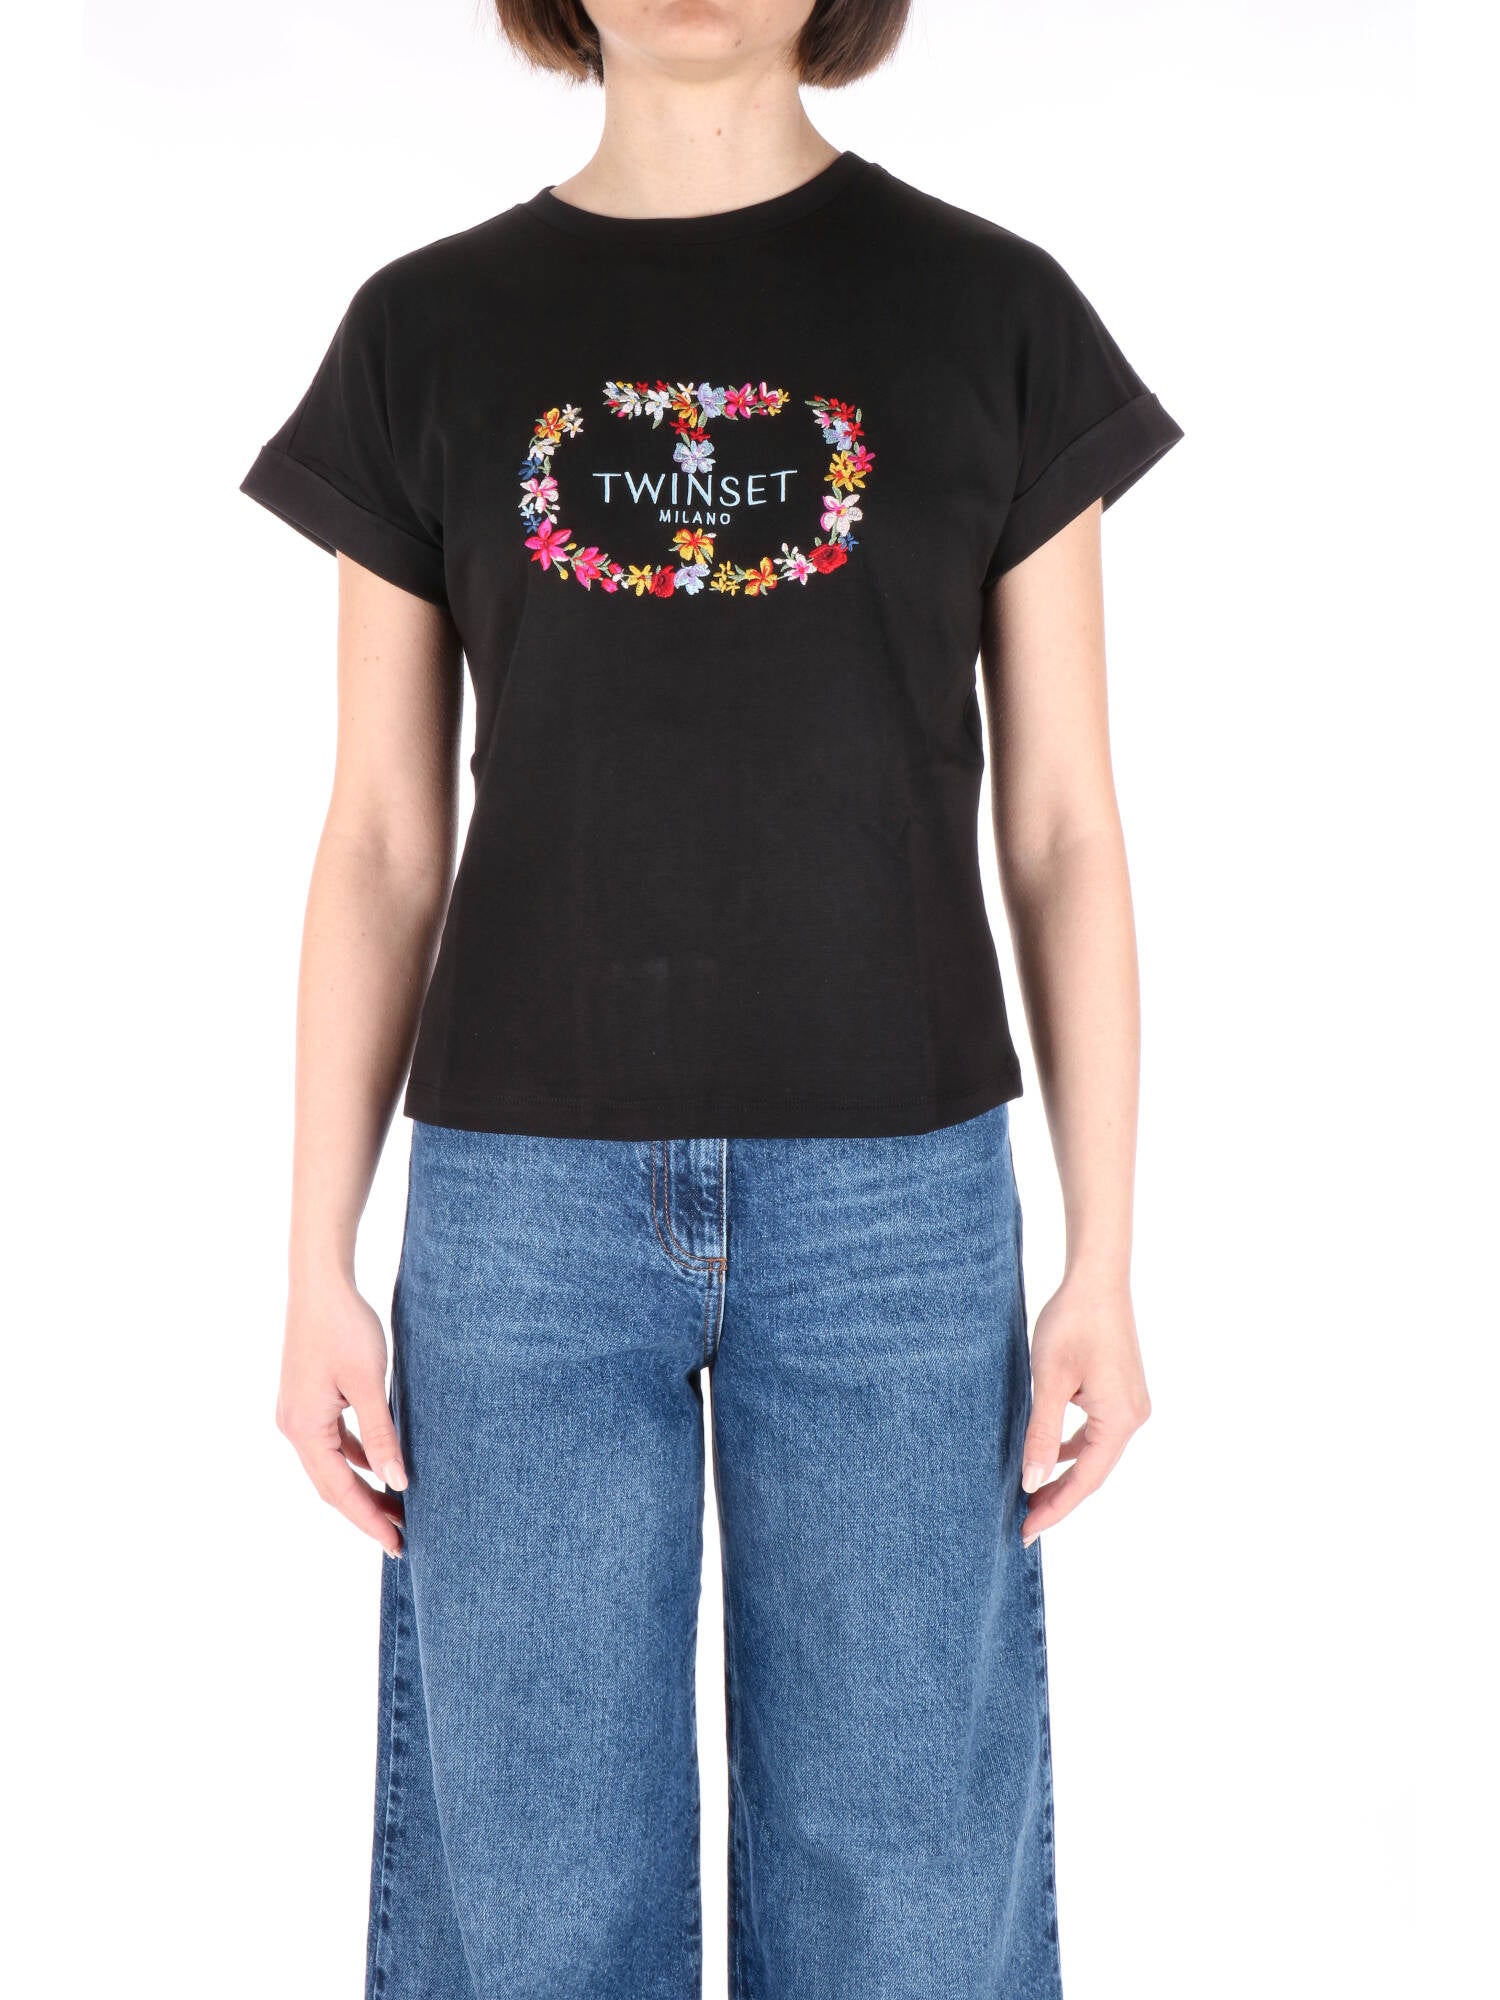 Twinset donna t-shirt con stampa